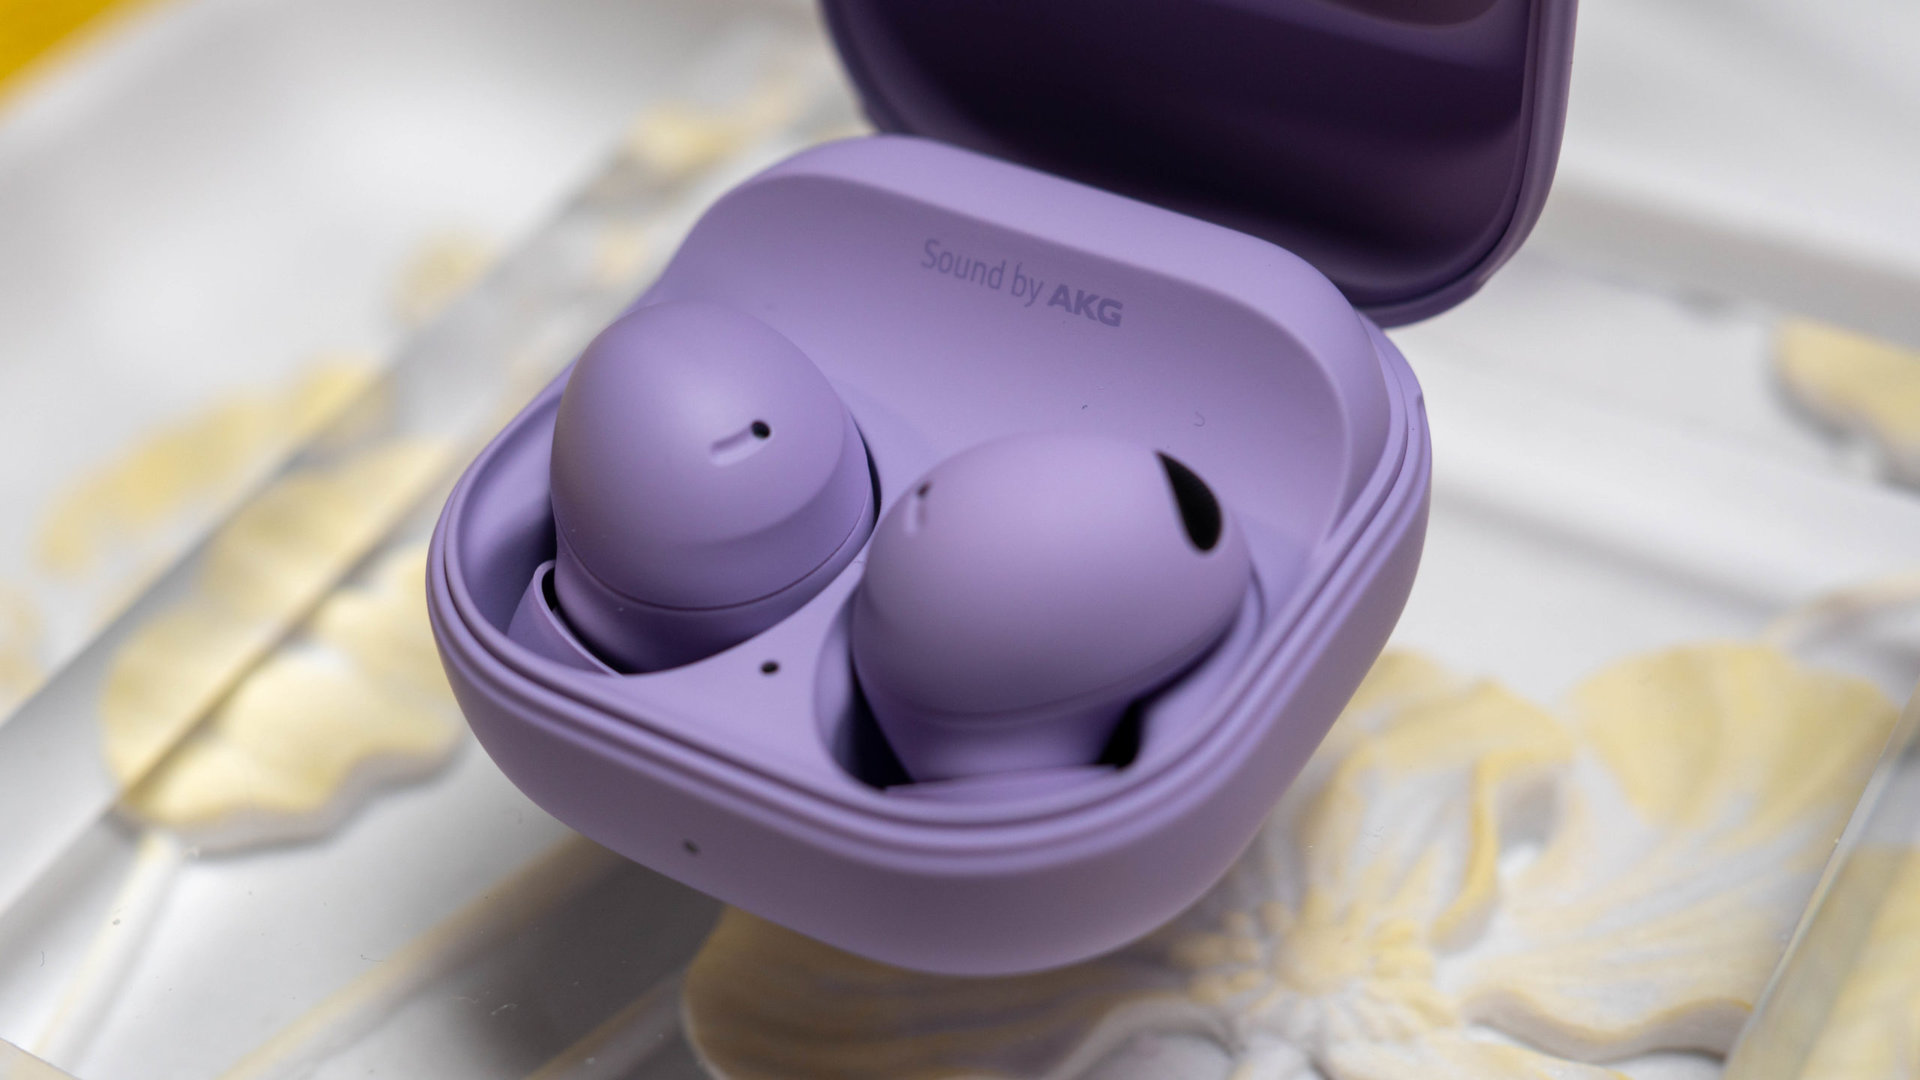 Samsung Galaxy Buds 2 Pro in Bora Purple color in charging case from right side